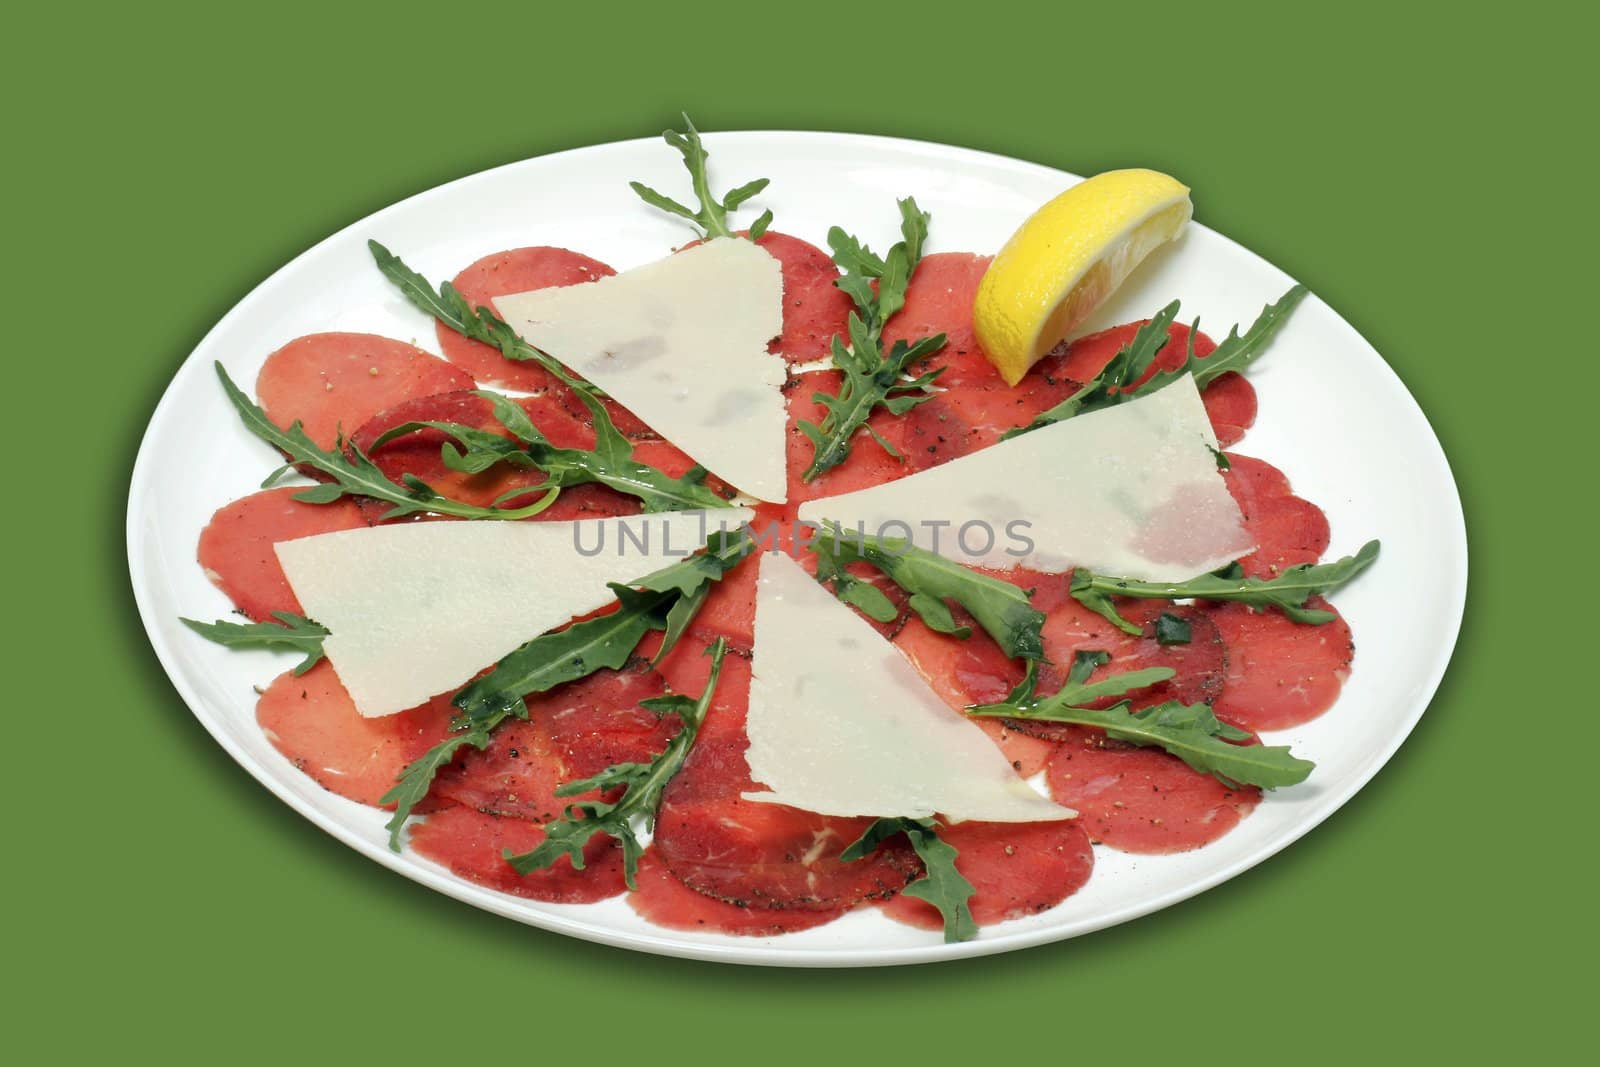 Beef carpaccio by AlexKhrom